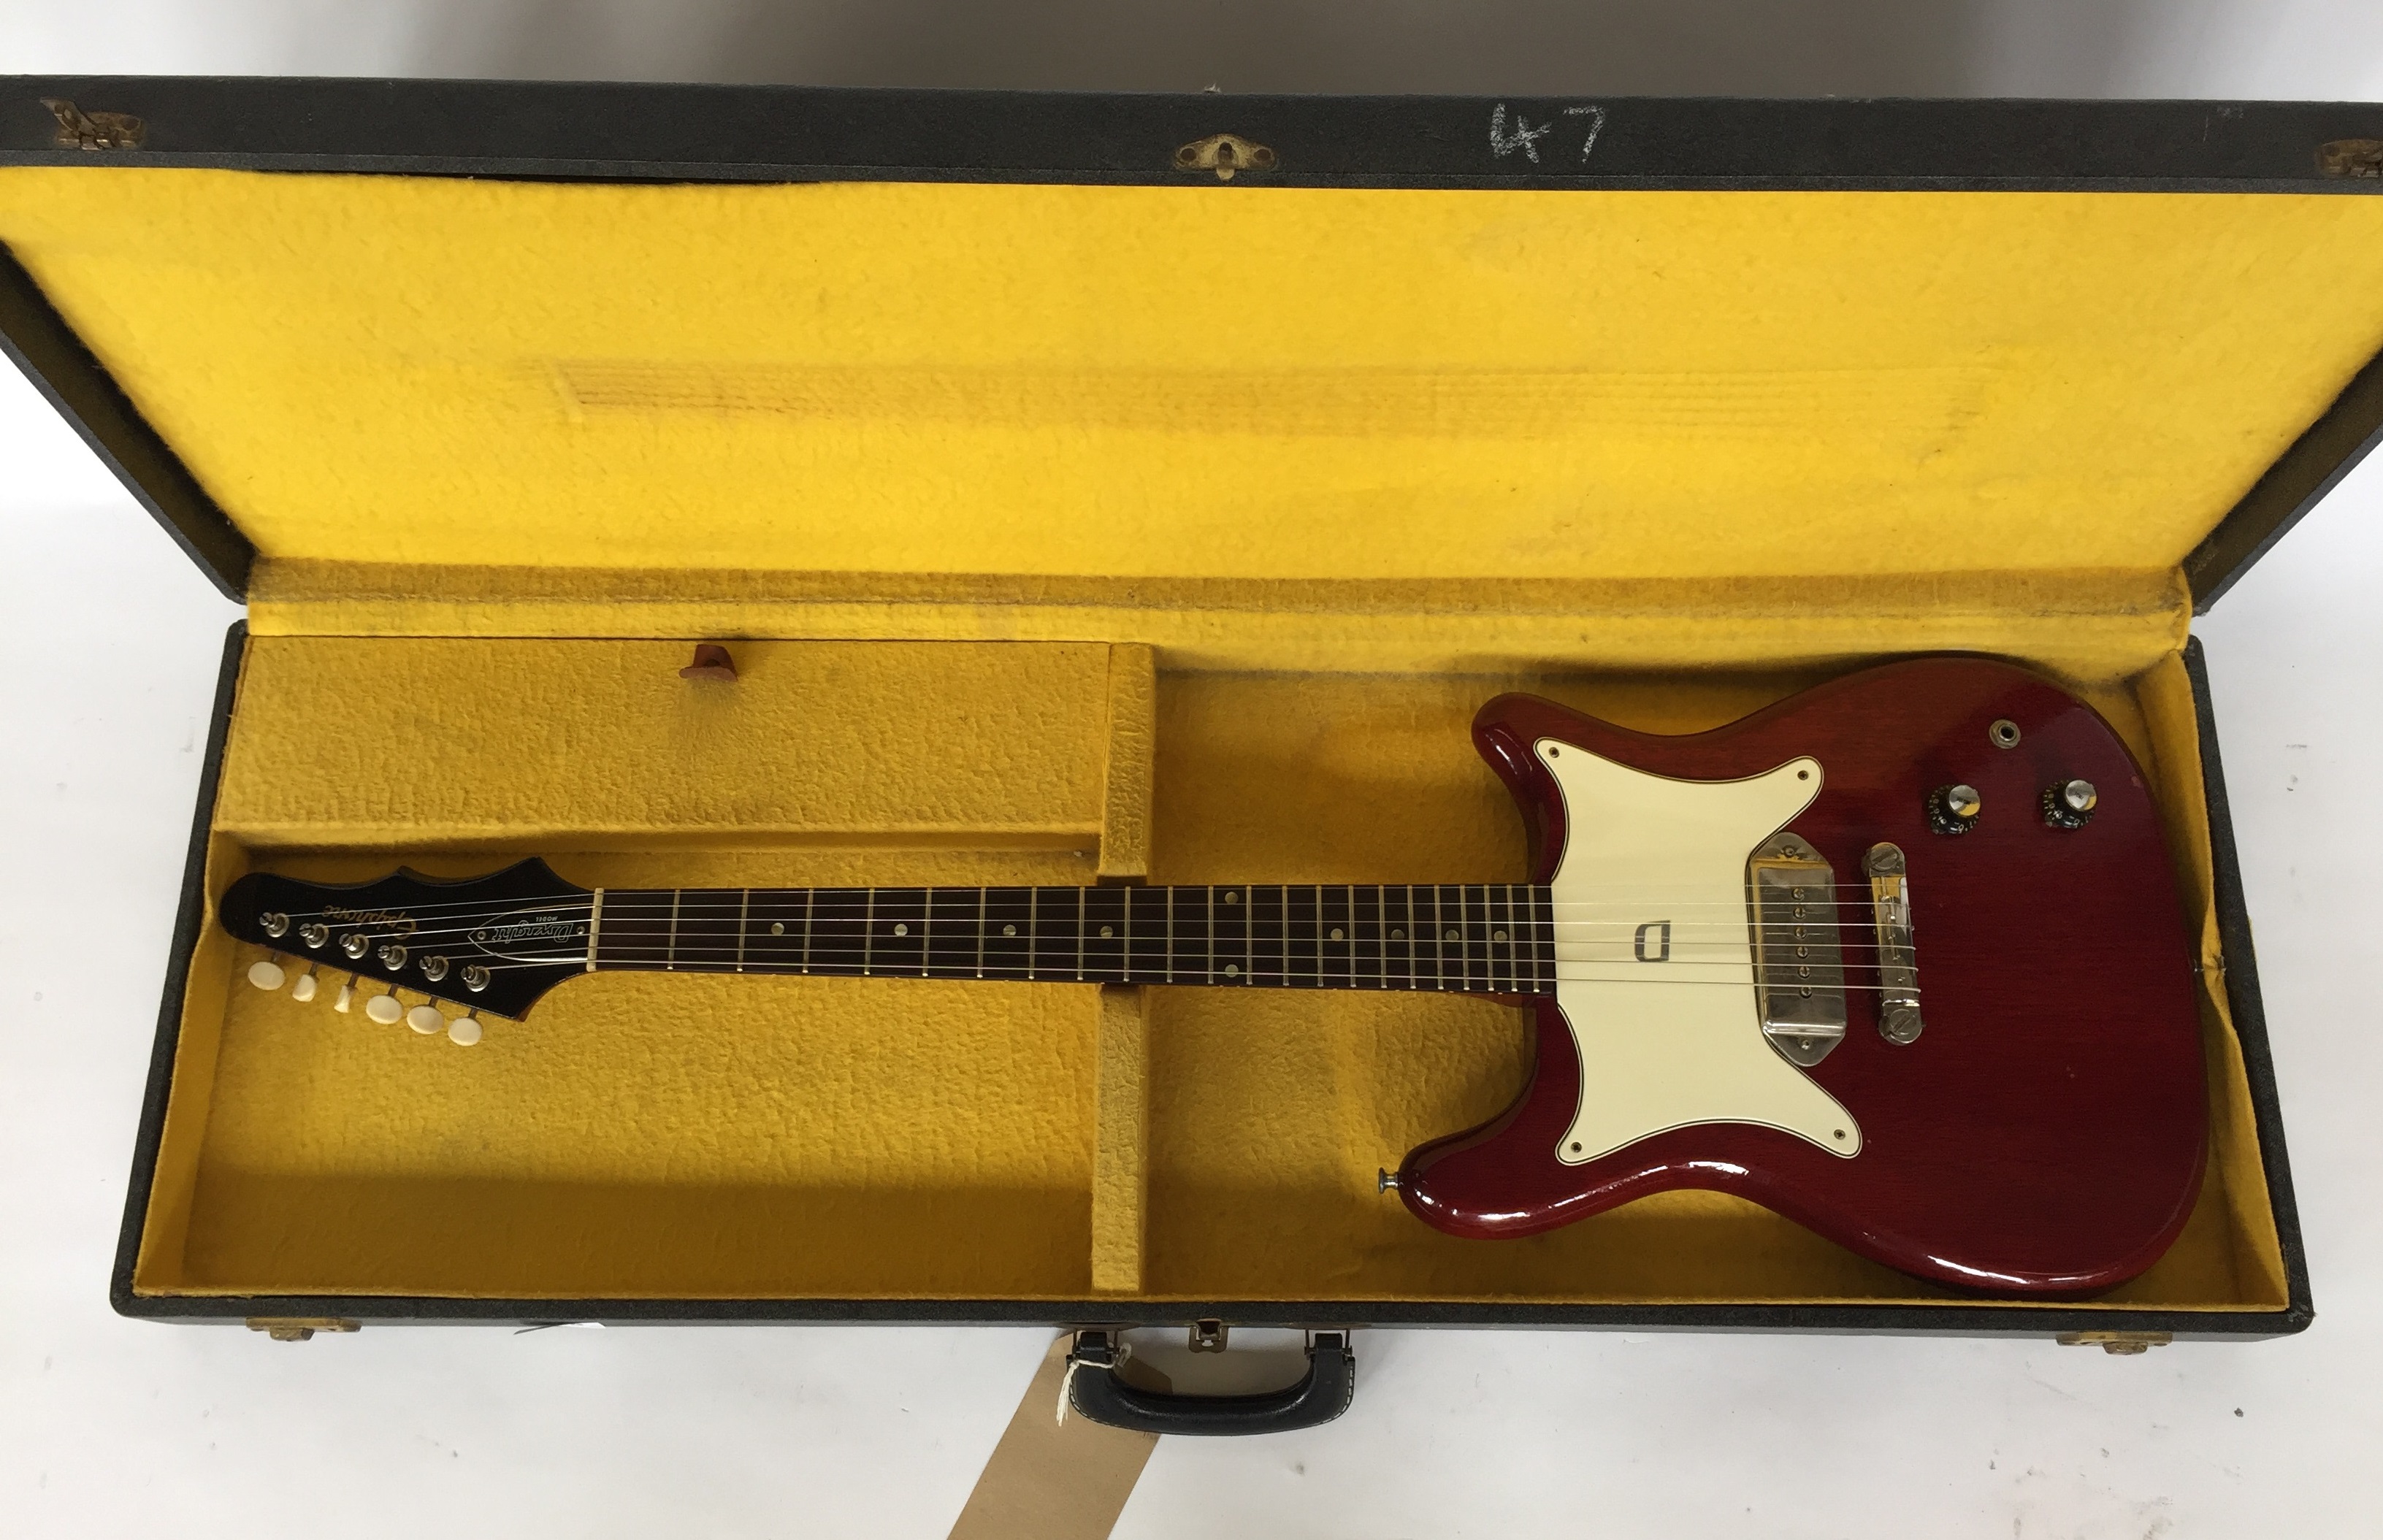 DWIGHT CORONET 1965 ELECTRIC GUITAR ***TEMPORARILY WITHDRAWN UNTIL RECEIPT OF CITES ARTICLE 10 - Image 6 of 7